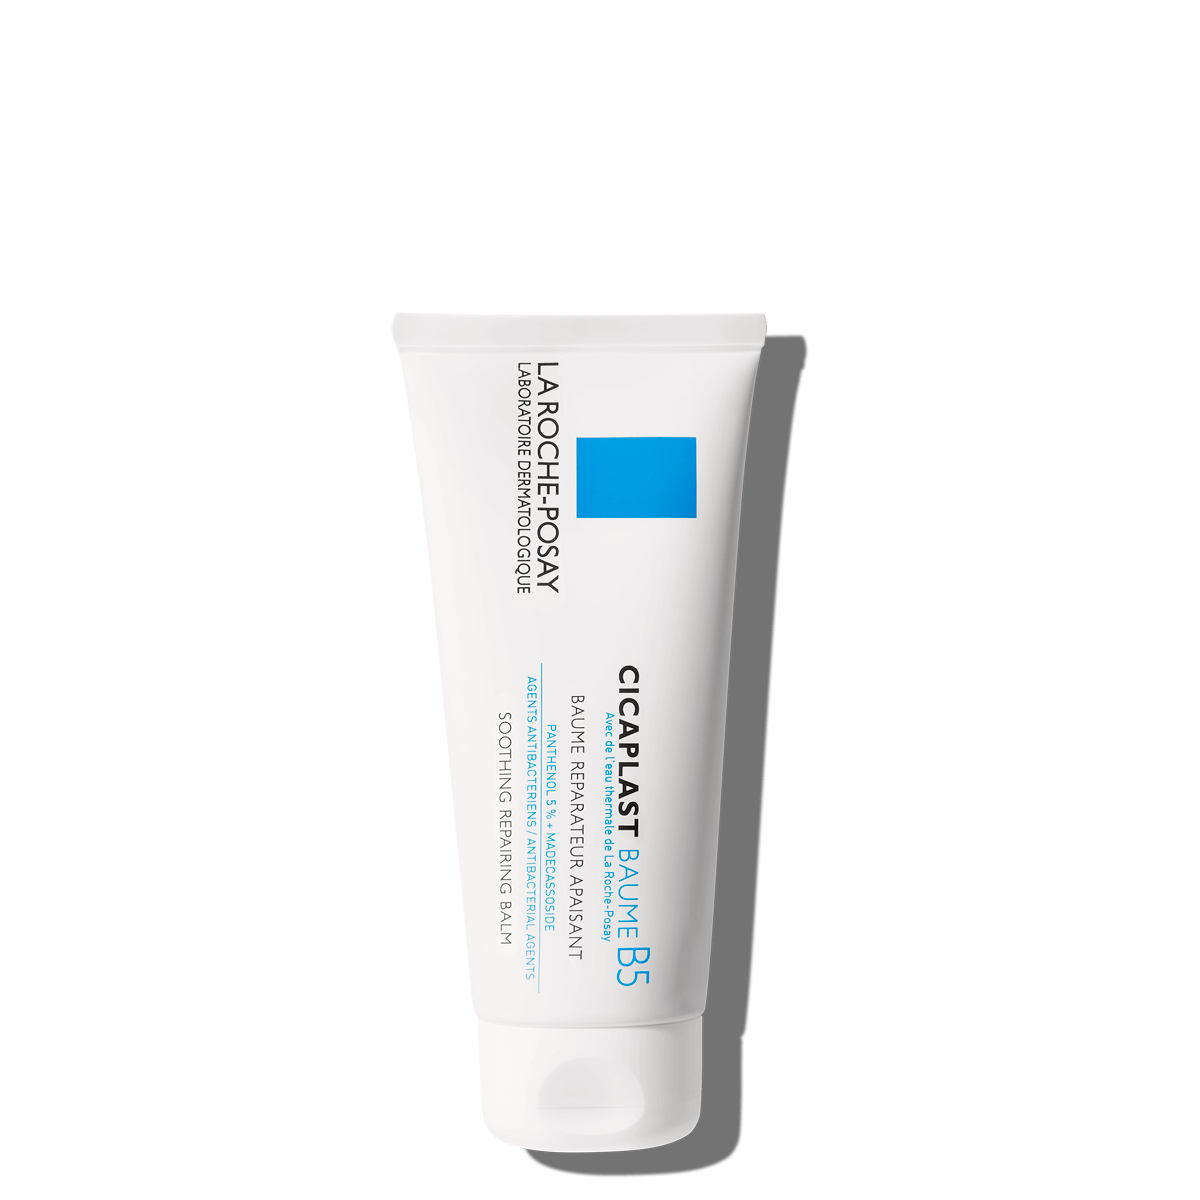 La Roche-Posay - Cicaplast Ultra-Repairing Soothing Face and Body Balm B5+ 100ml